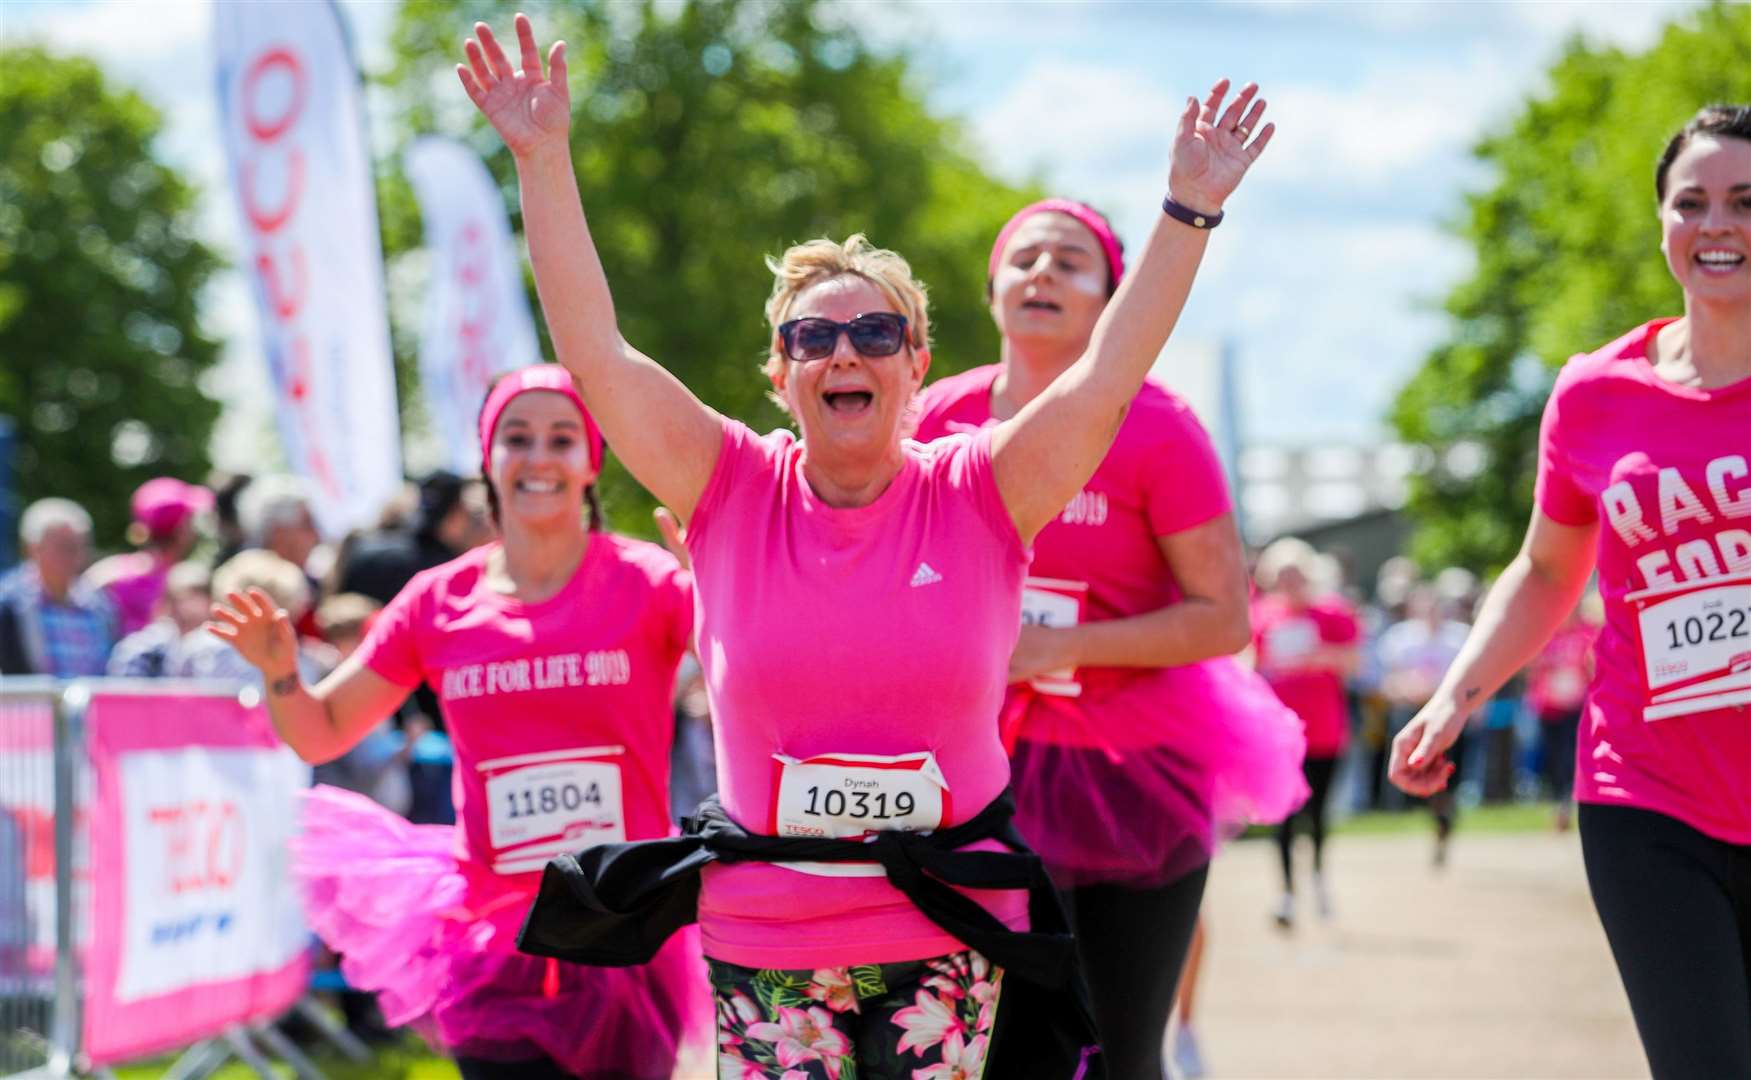 Race for Life is a nationwide series of 5k runs in aid of Cancer Research UK